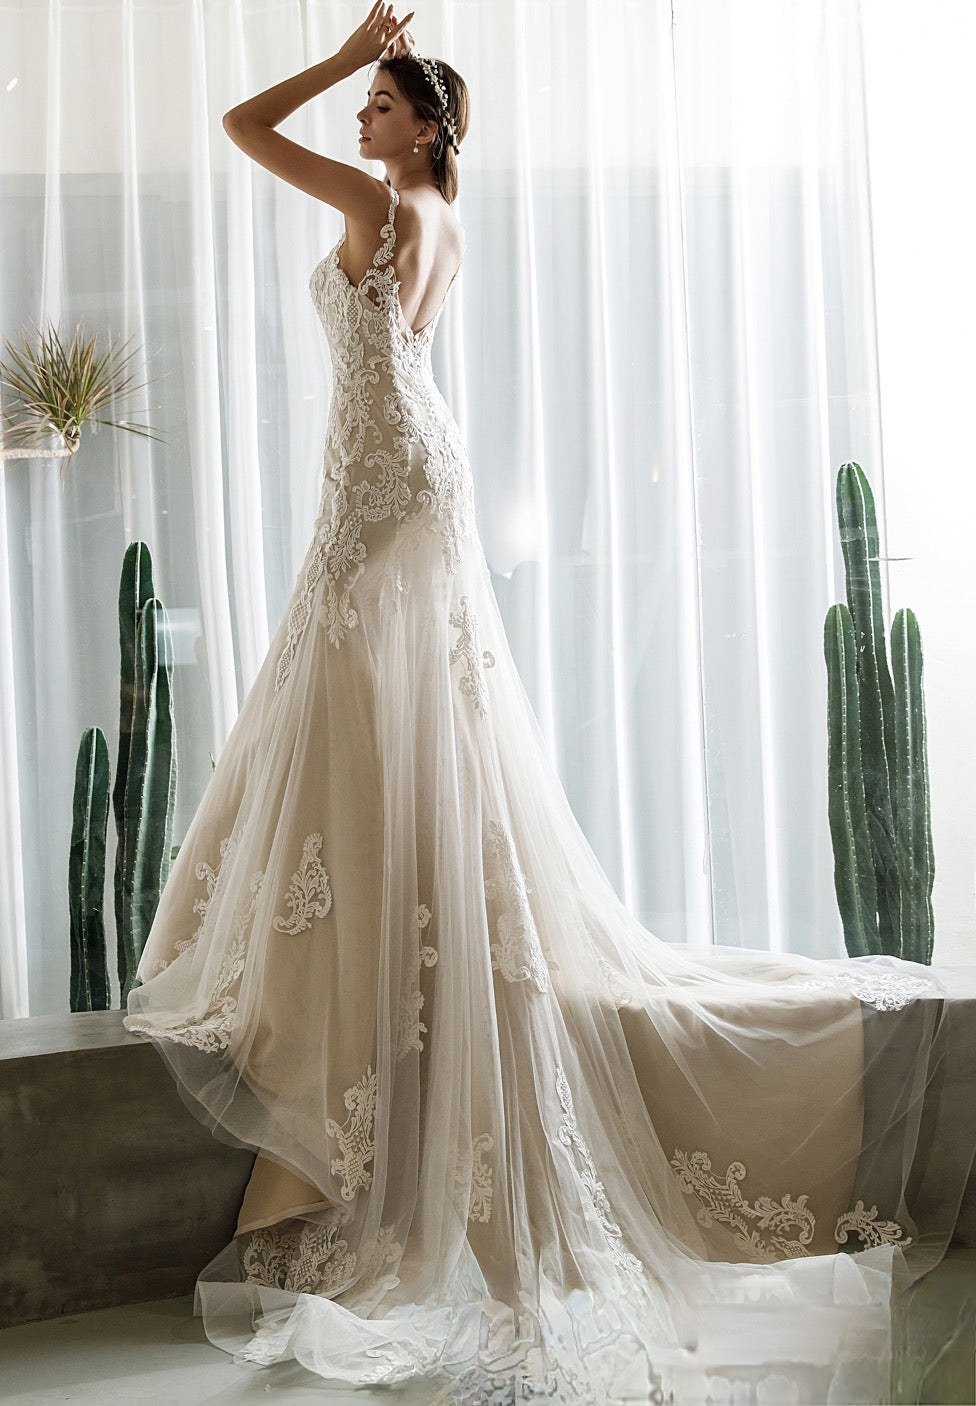 Vintage Lace Fit and Flare Wedding Dress With Court Train – TulleLux Bridal  Crowns & Accessories